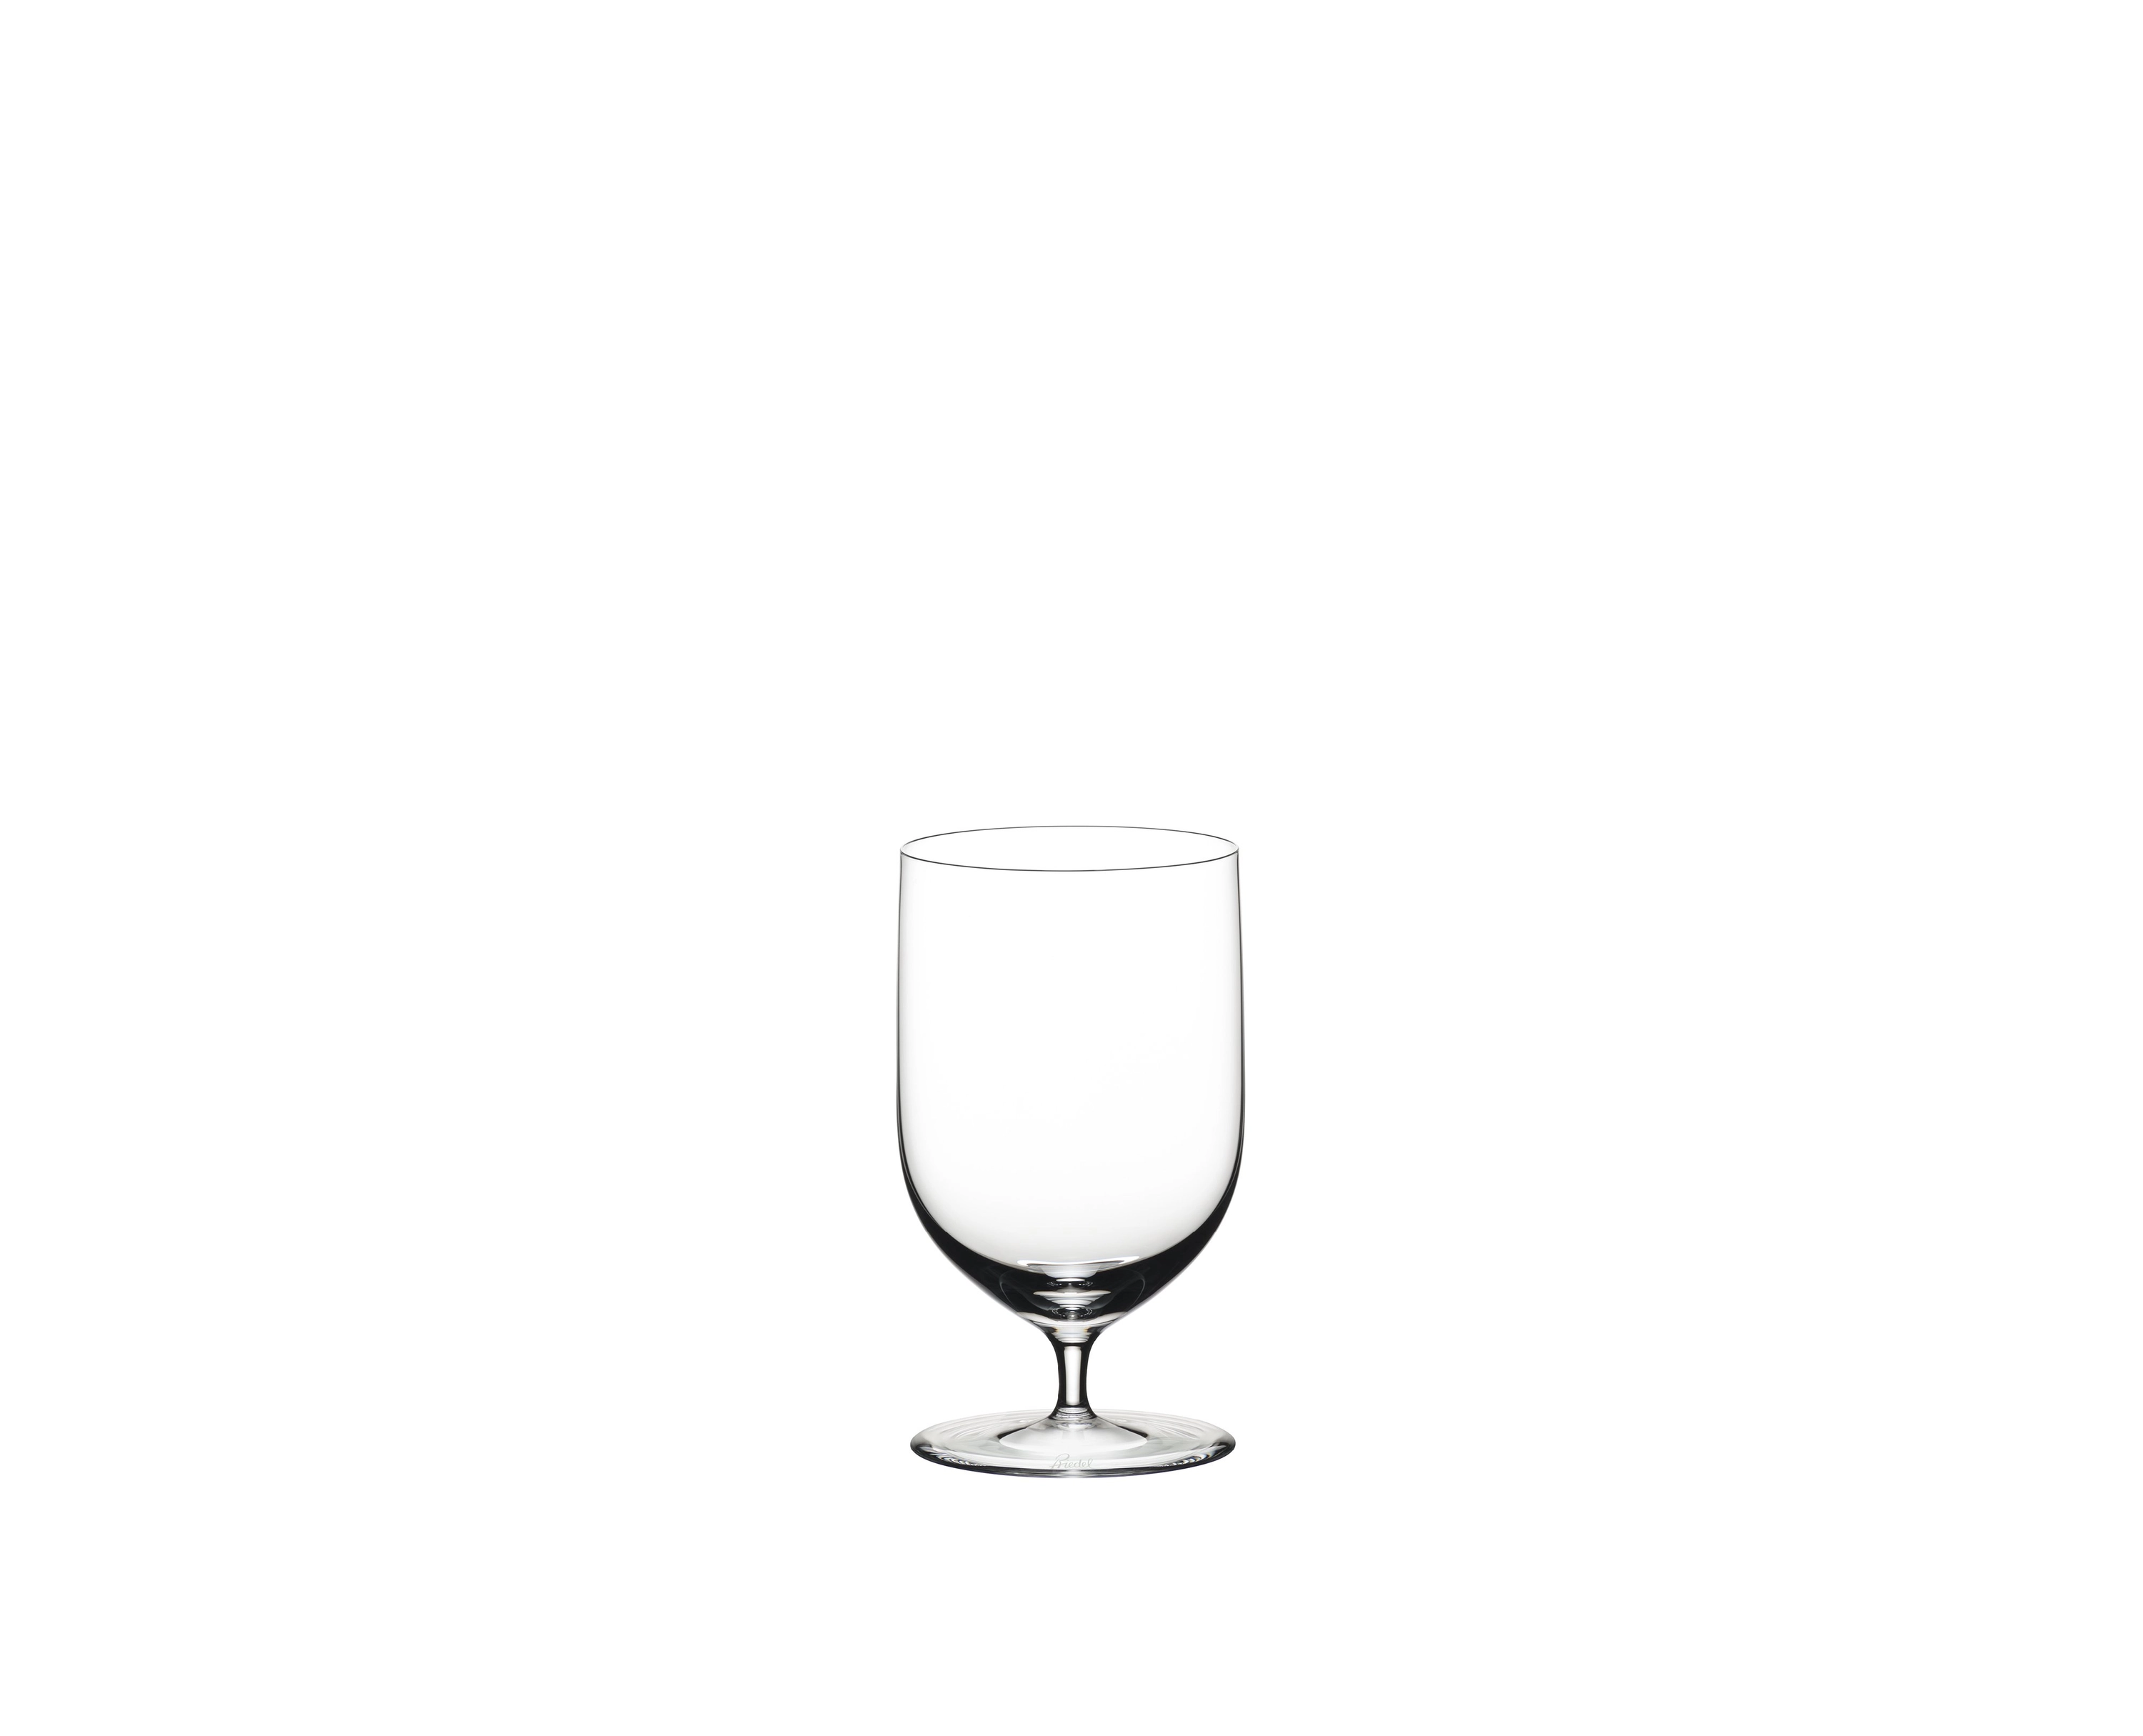 Riedel Sommeliers Goblet Water, Set of 6 pieces